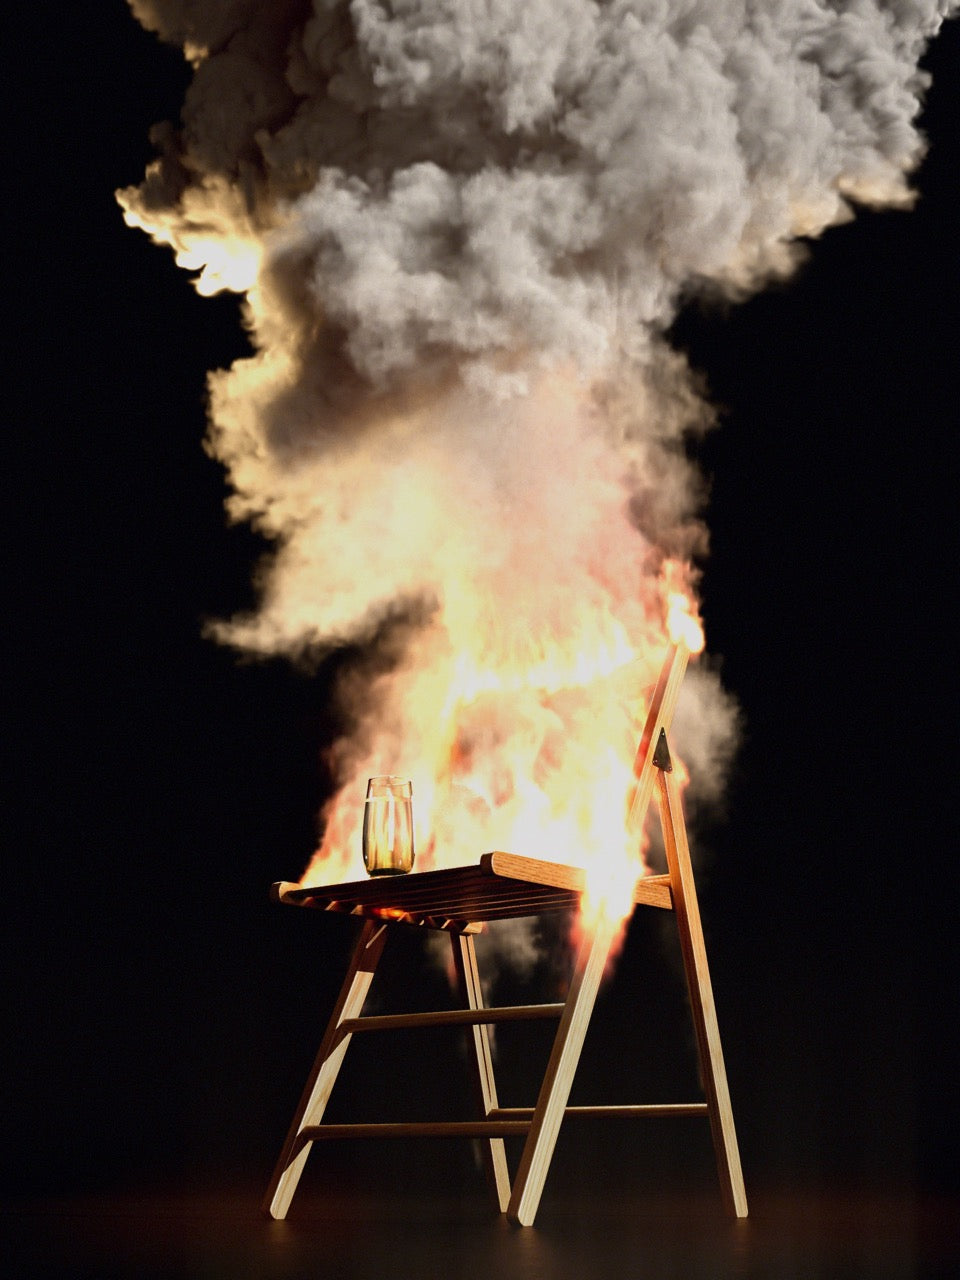 "Chair on Fire"